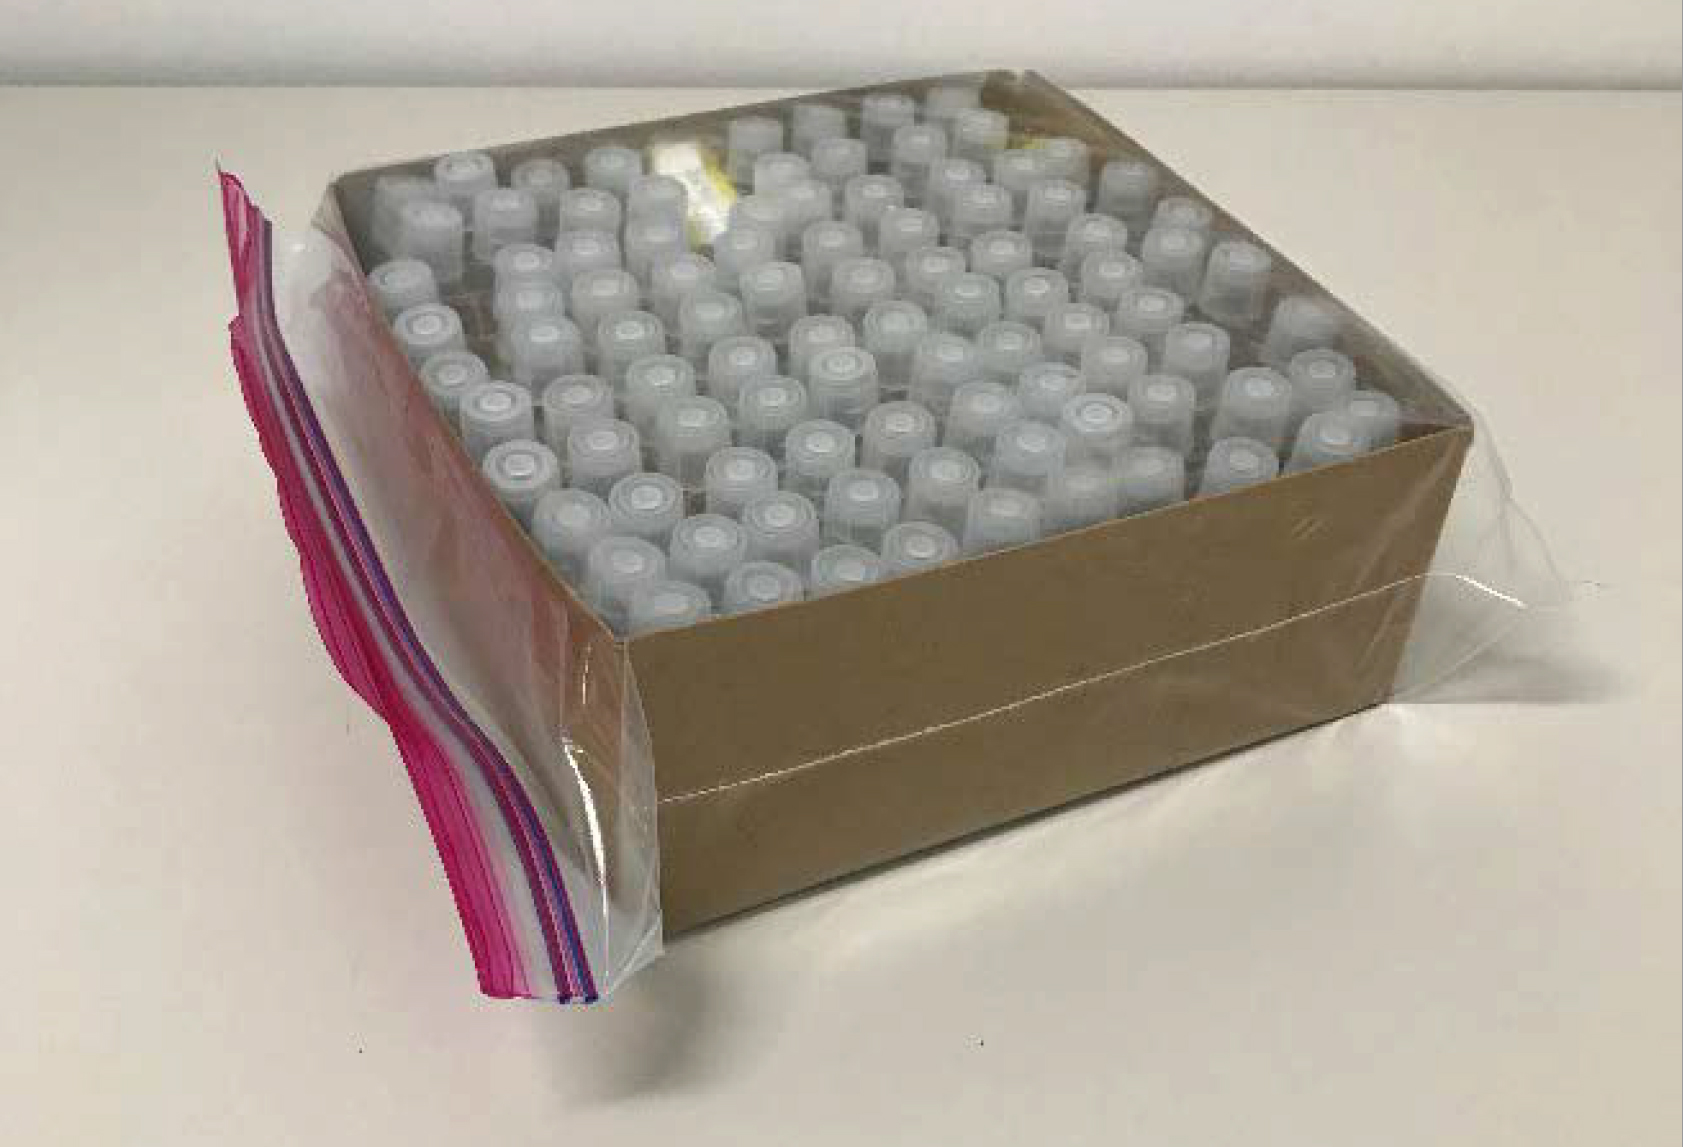 Photo showing tubes standing inside of a cardboard box that is inside a zip-top bag.